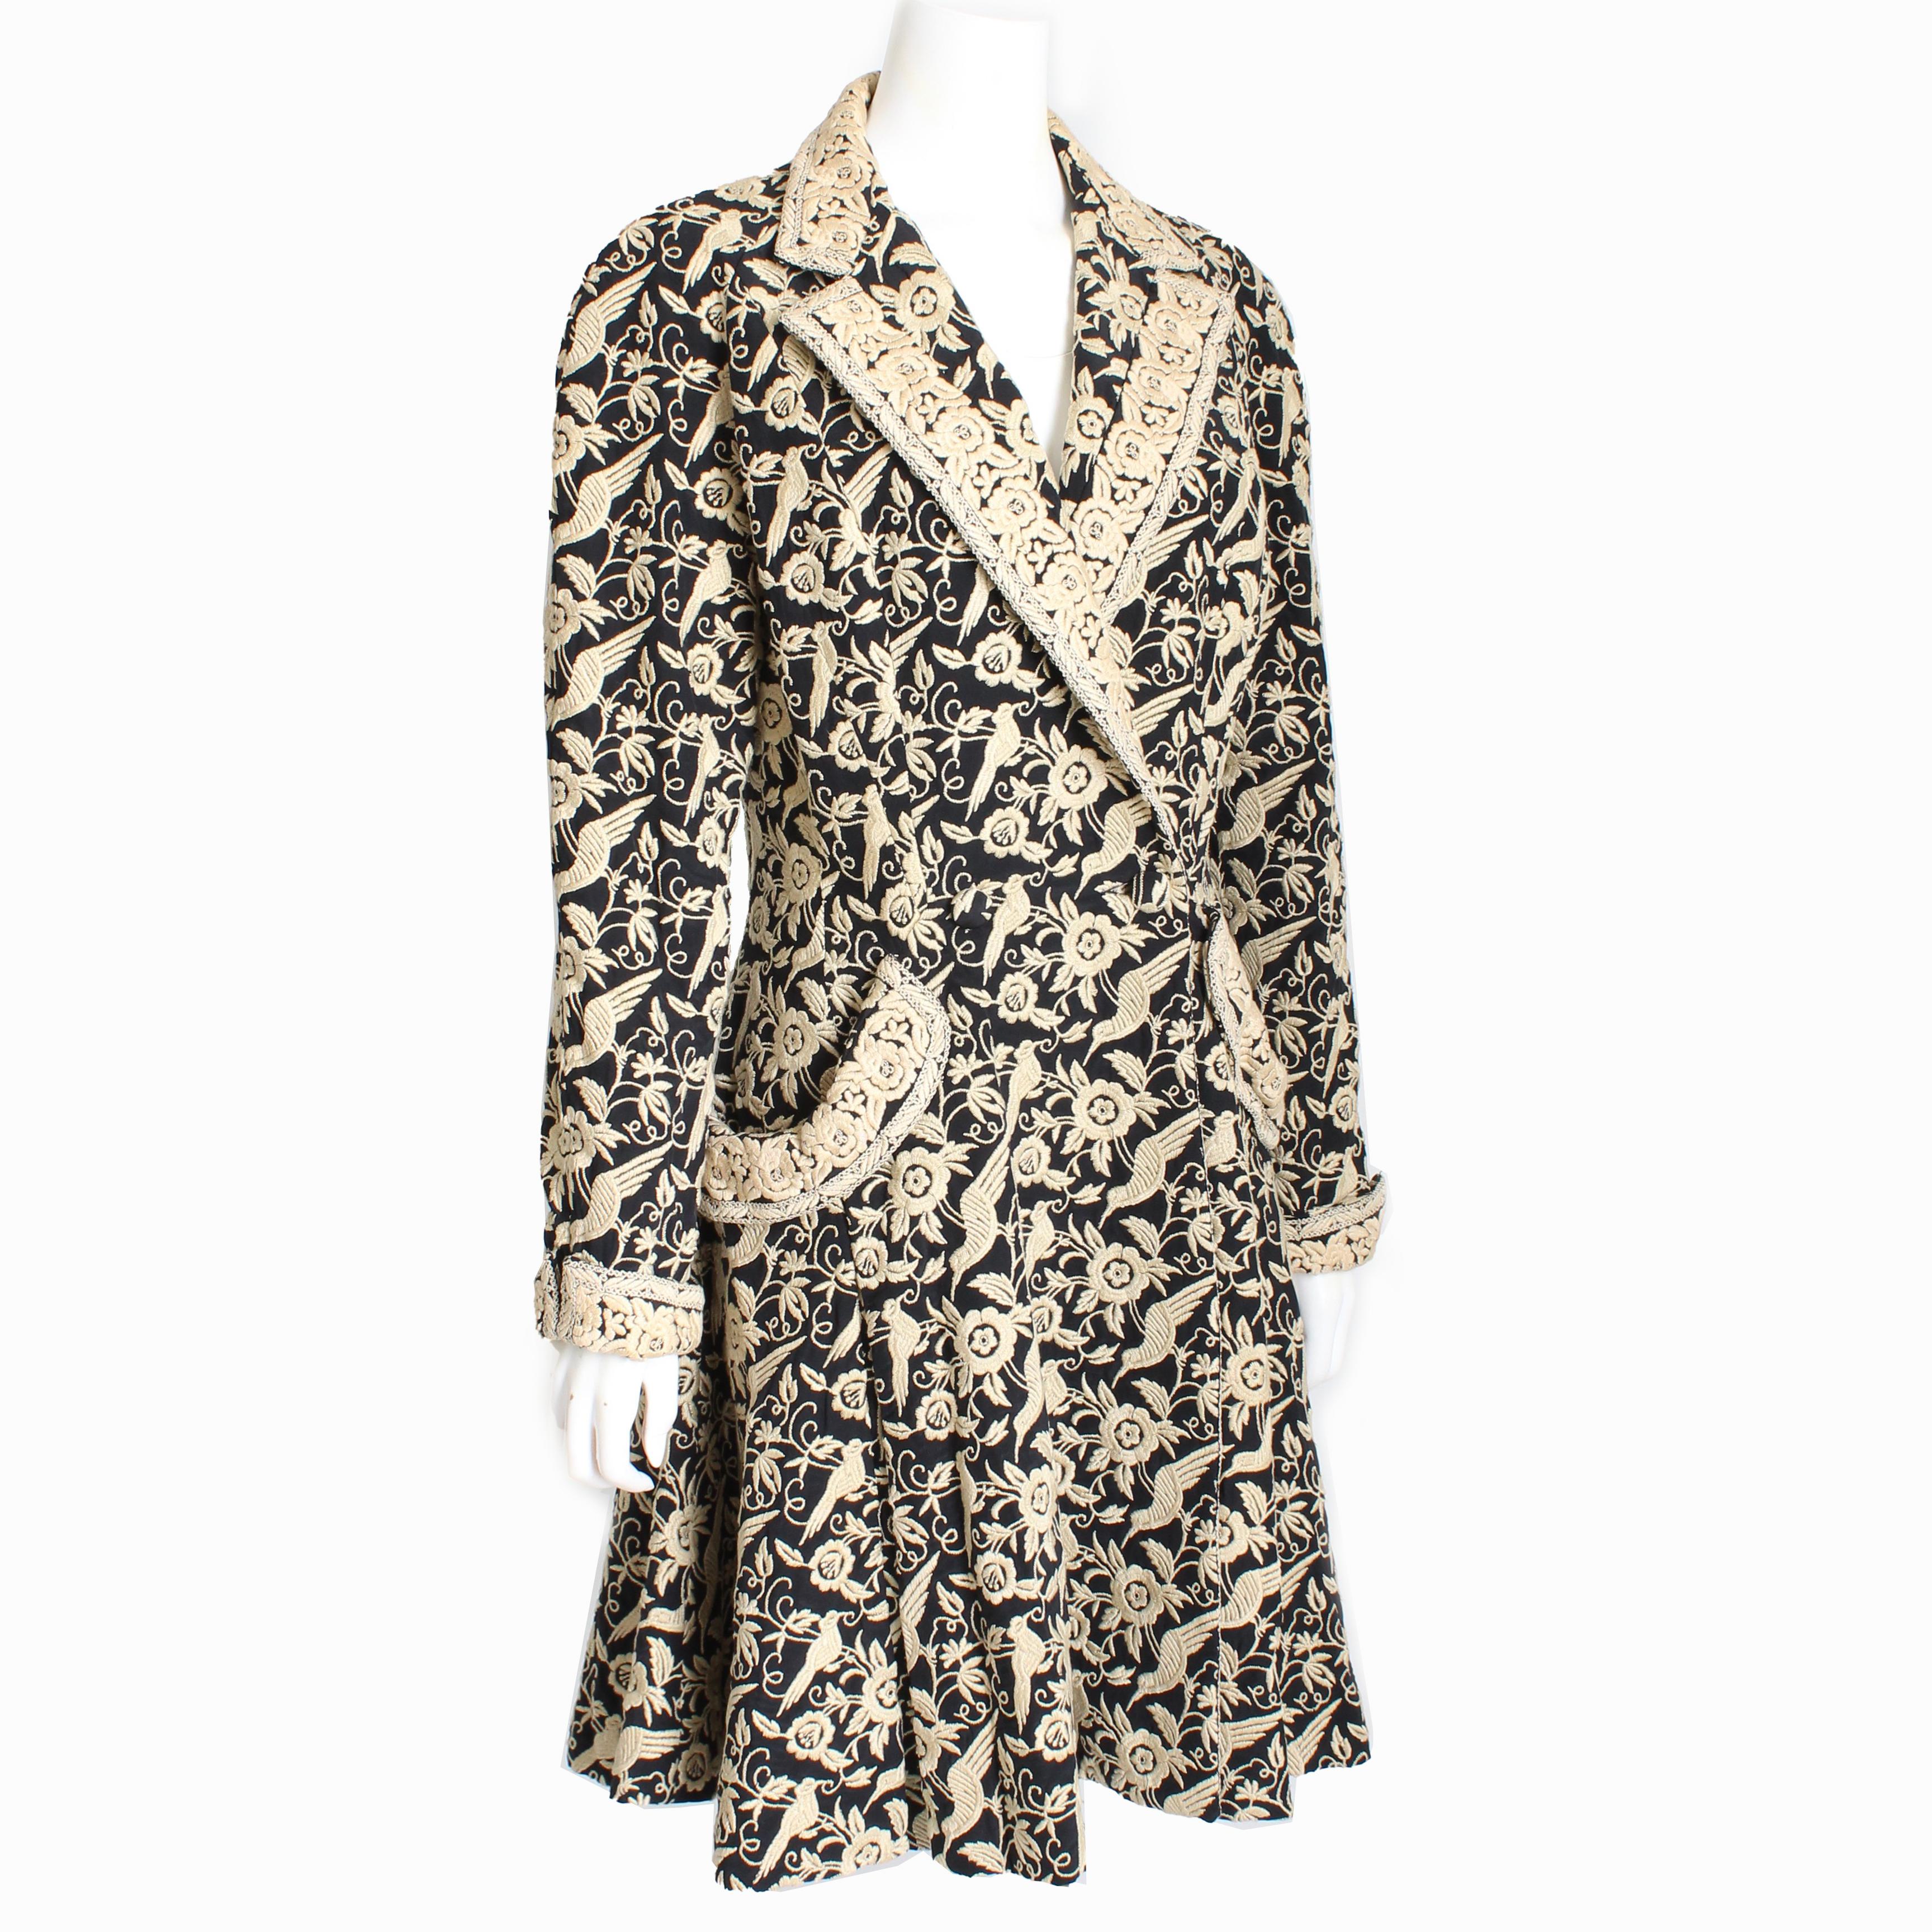 Preowned, vintage Norma Kamali princess-style coat, likely made in the early 90s.  Made from black silk, it features an embroidered pattern of birds and florals throughout, with
cuffed sleeves and oversized pockets.  It fastens at the waist with two